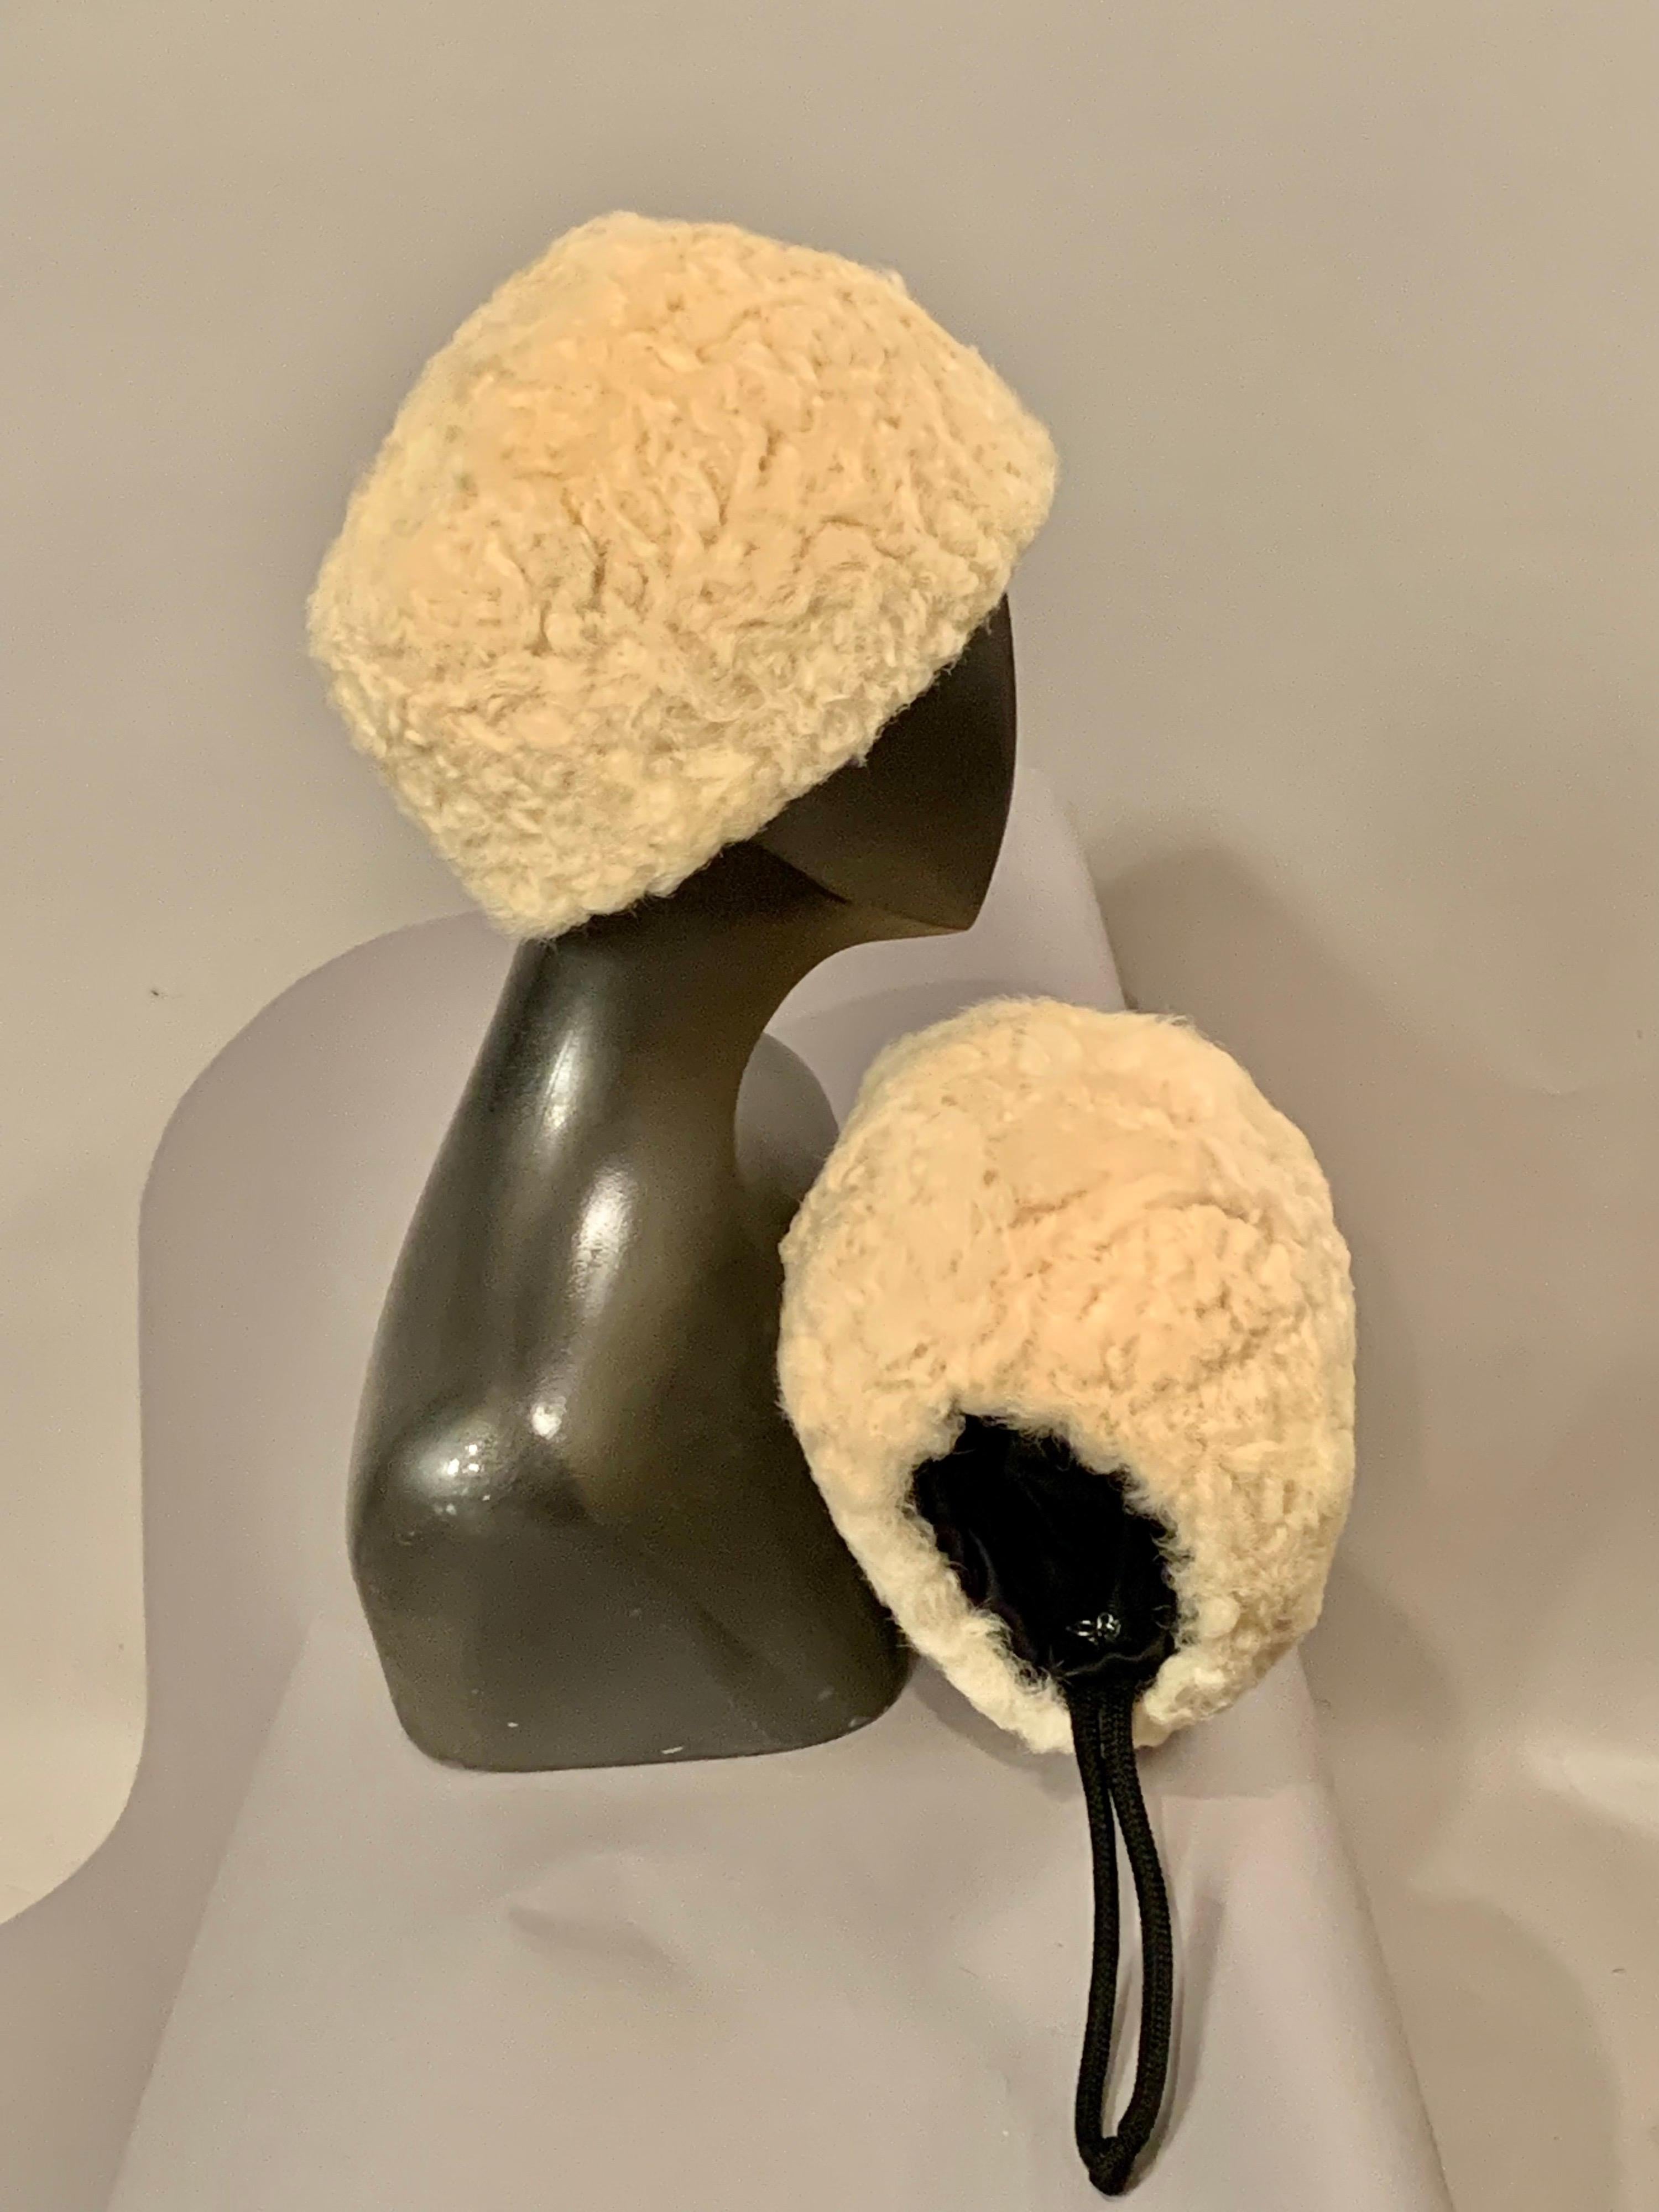 The perfect pair for colder weather is this chic shearling hat and matching muff retailed by Macy's.  The hat is lined with taupe wool for extra warmth and the muff is lined with black satin.  There is an interior zippered pocket and a black cord